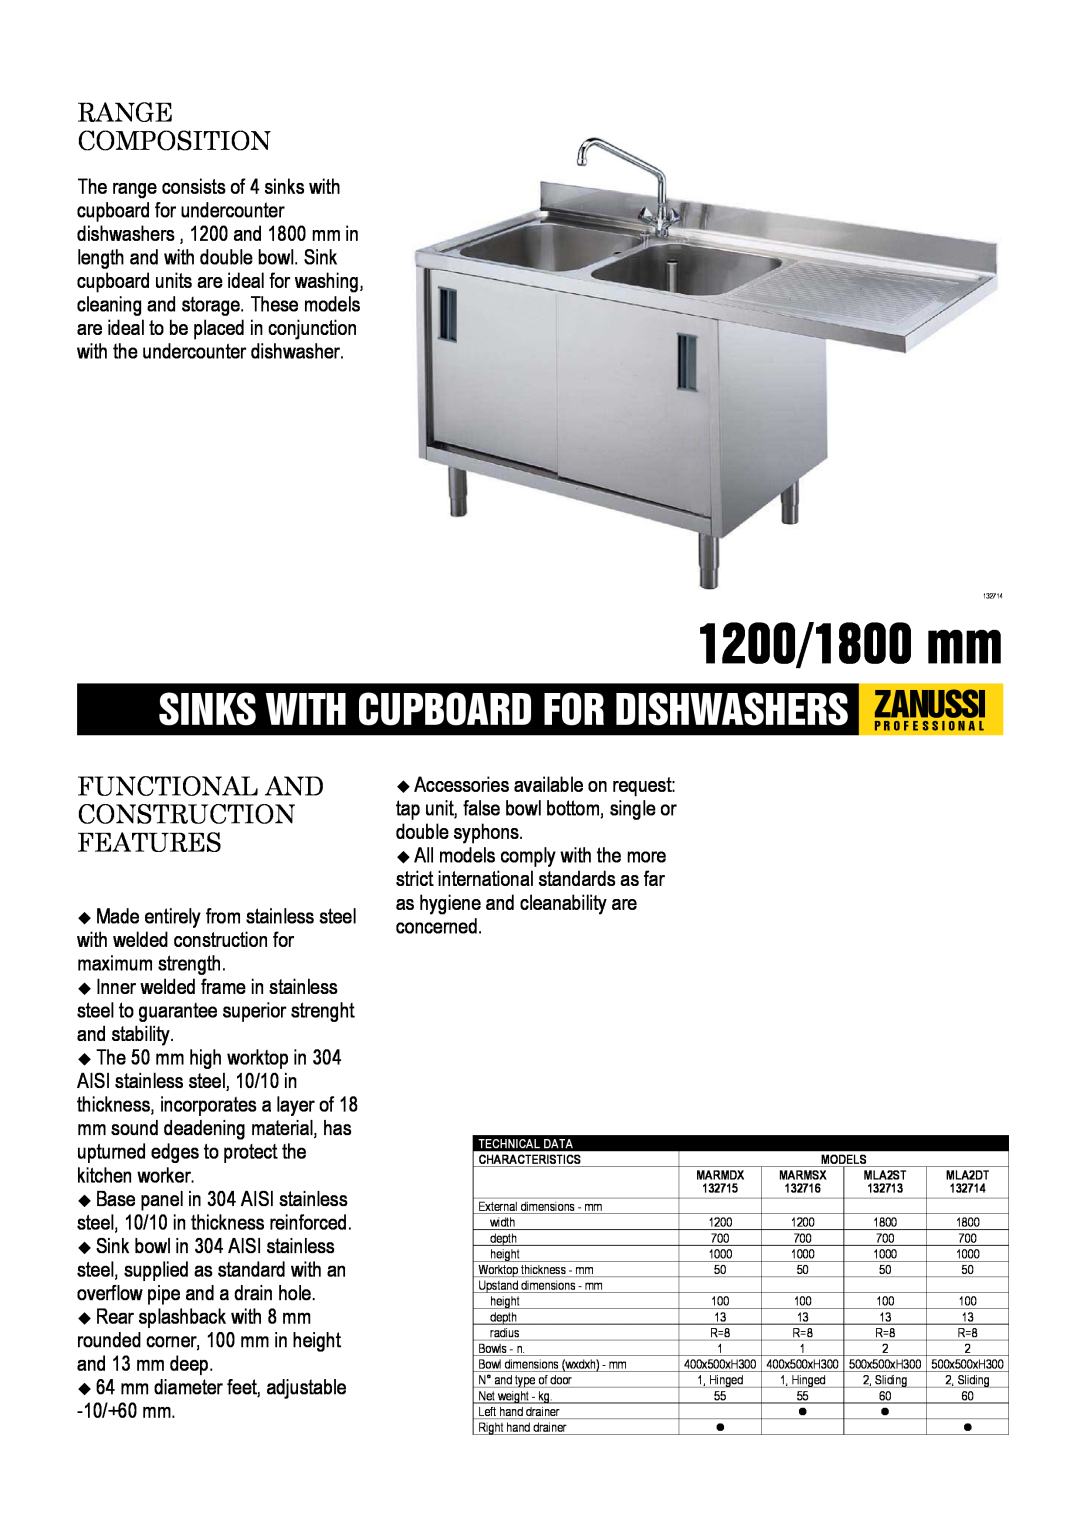 Zanussi MLA2DT, MLA2ST, MARMSX, MARMDX dimensions 1200/1800 mm, Range Composition, Functional And Construction Features 